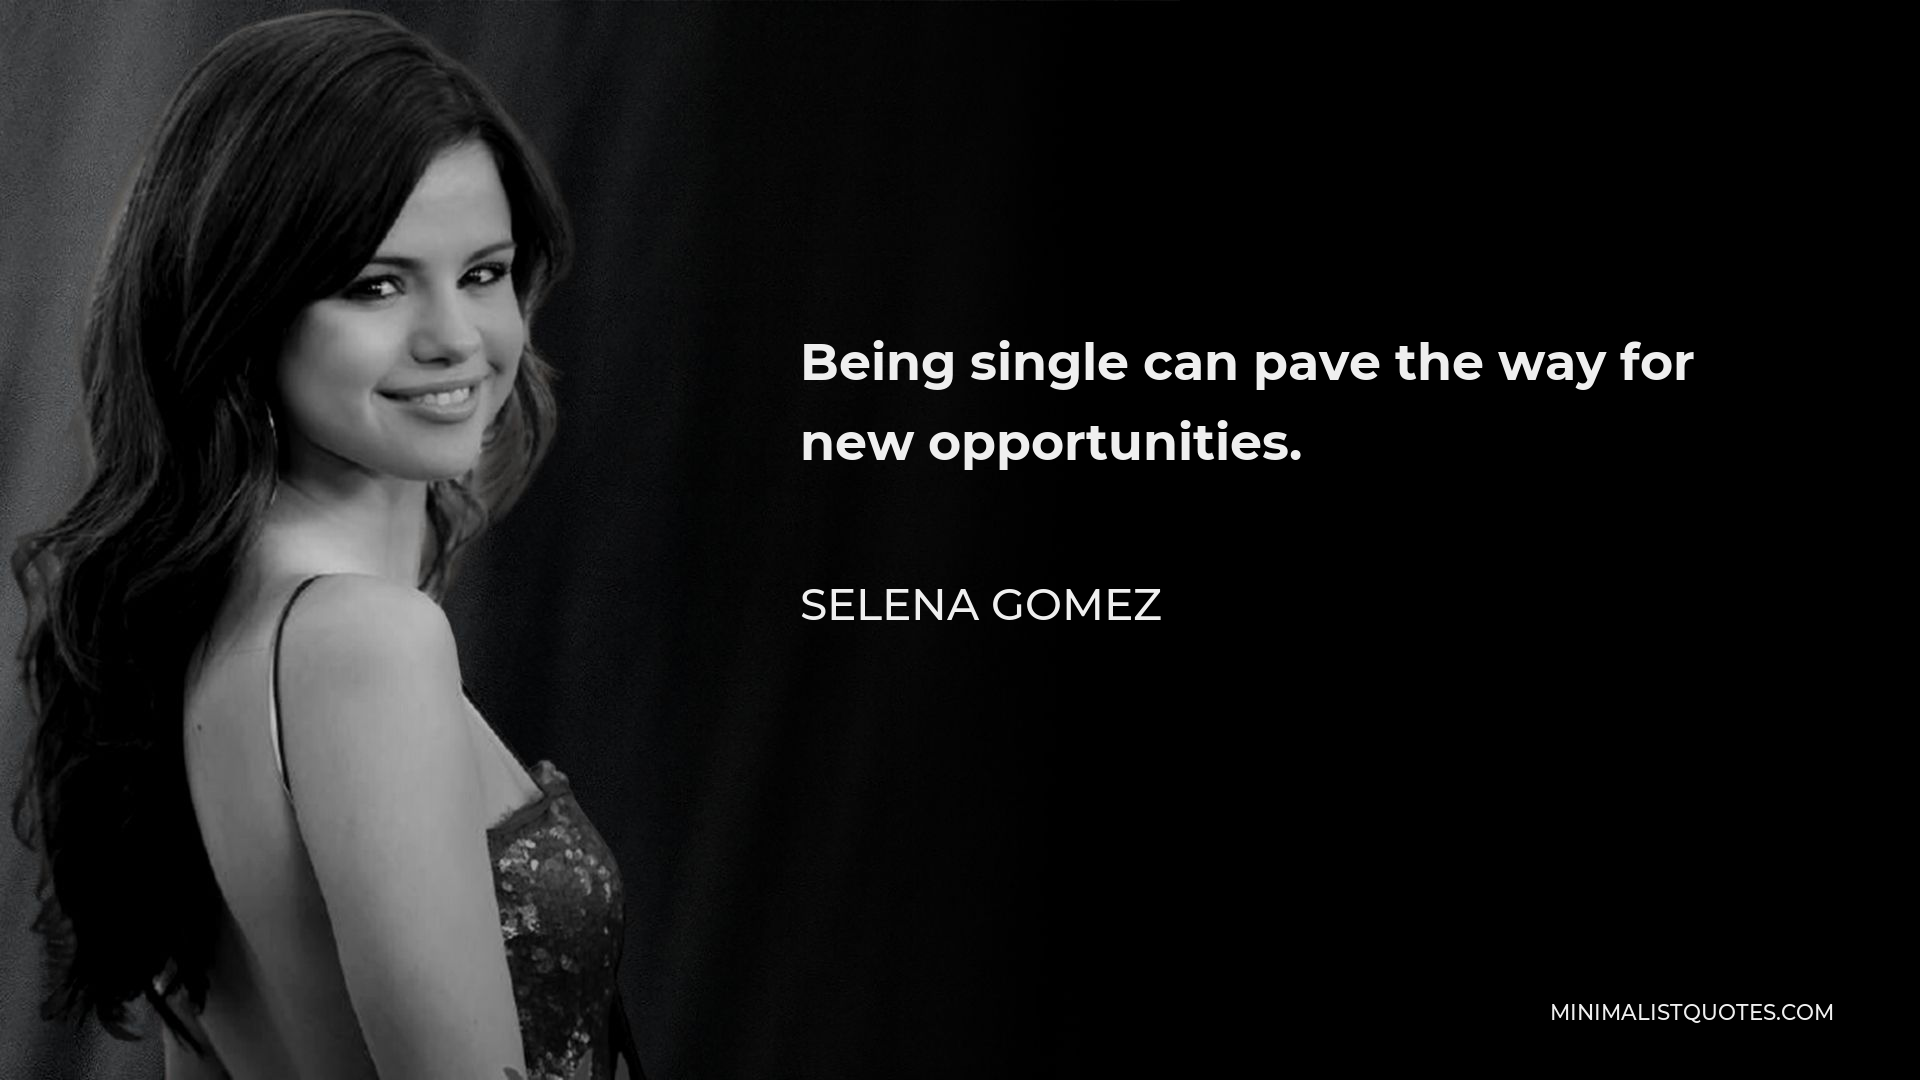 Selena Gomez Quote - Being single can pave the way for new opportunities.